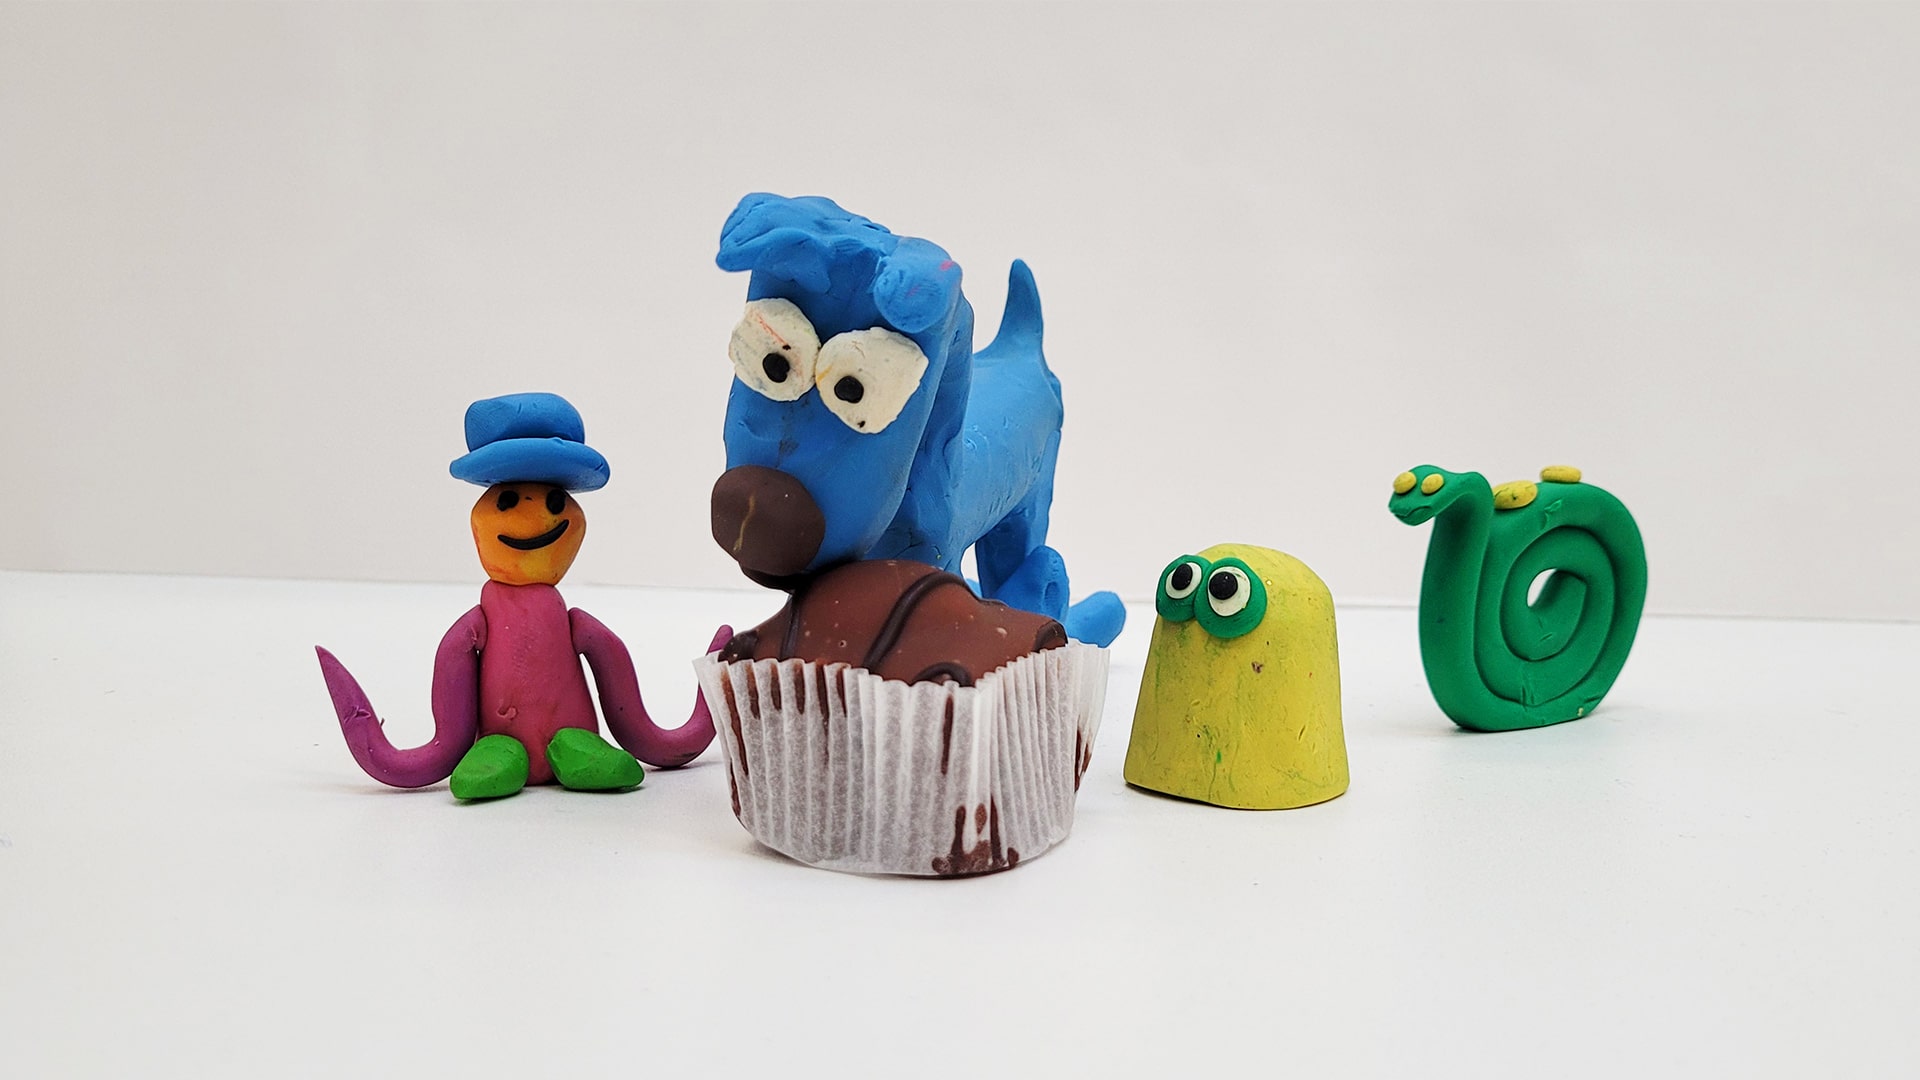 A photo showing some plasticine characters created for use in stop motion